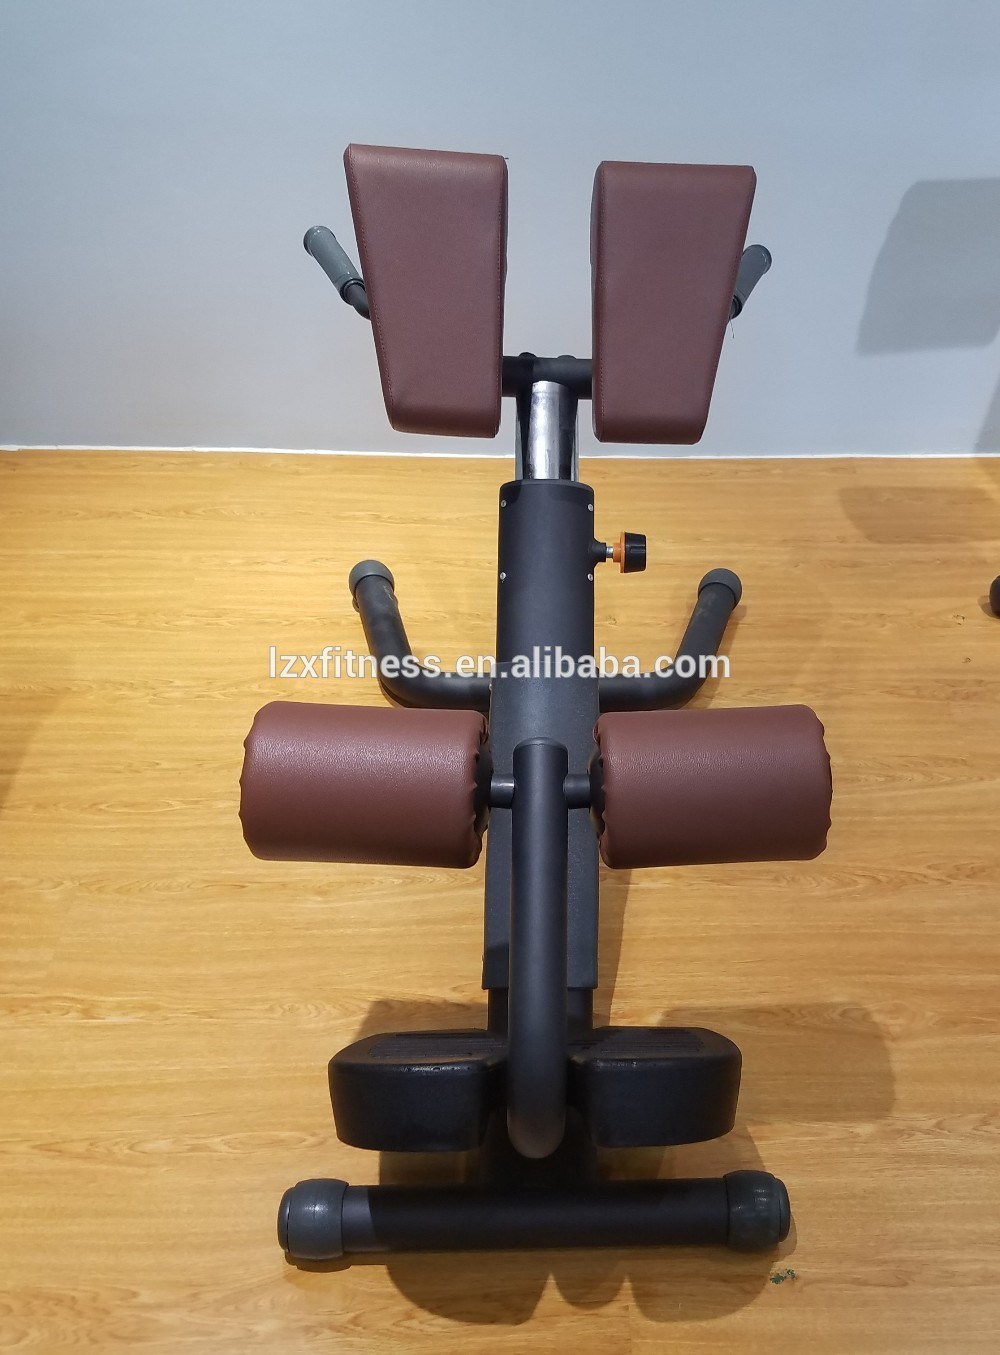 Roman Chair Multi Function Use Chair for Gym